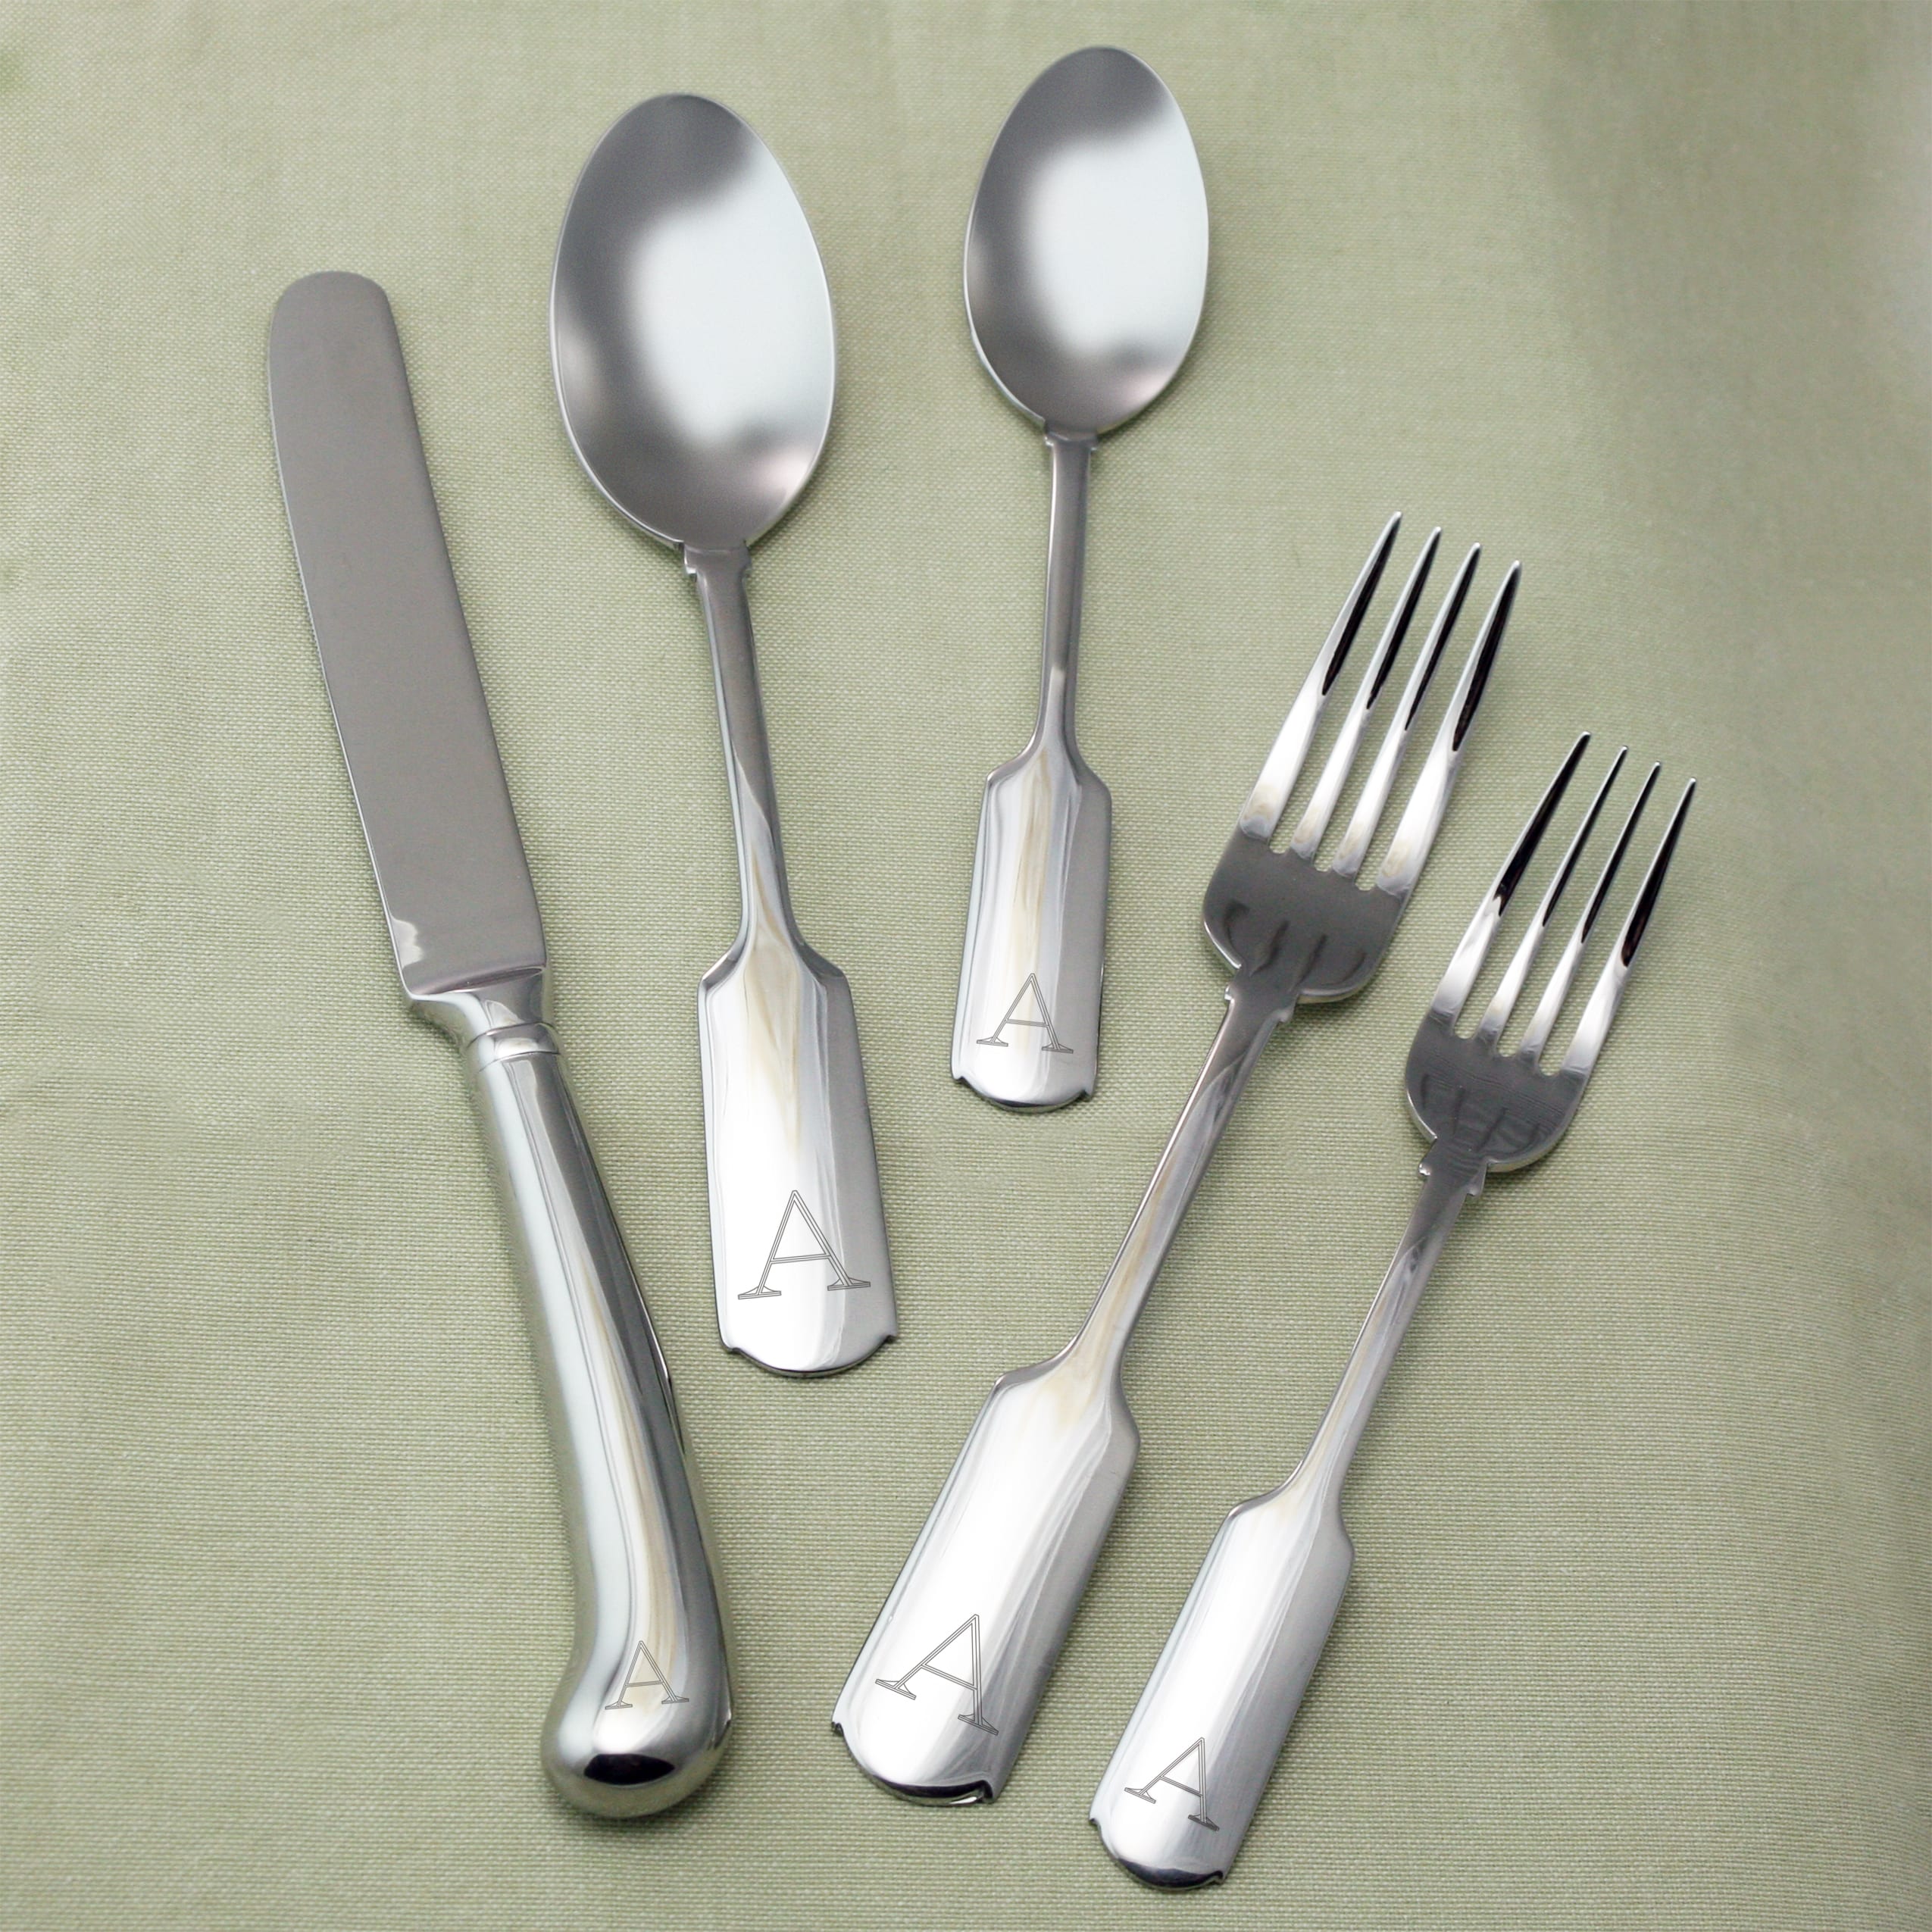 Fenmore Personalized 45 piece Stainless Steel Flatware Set